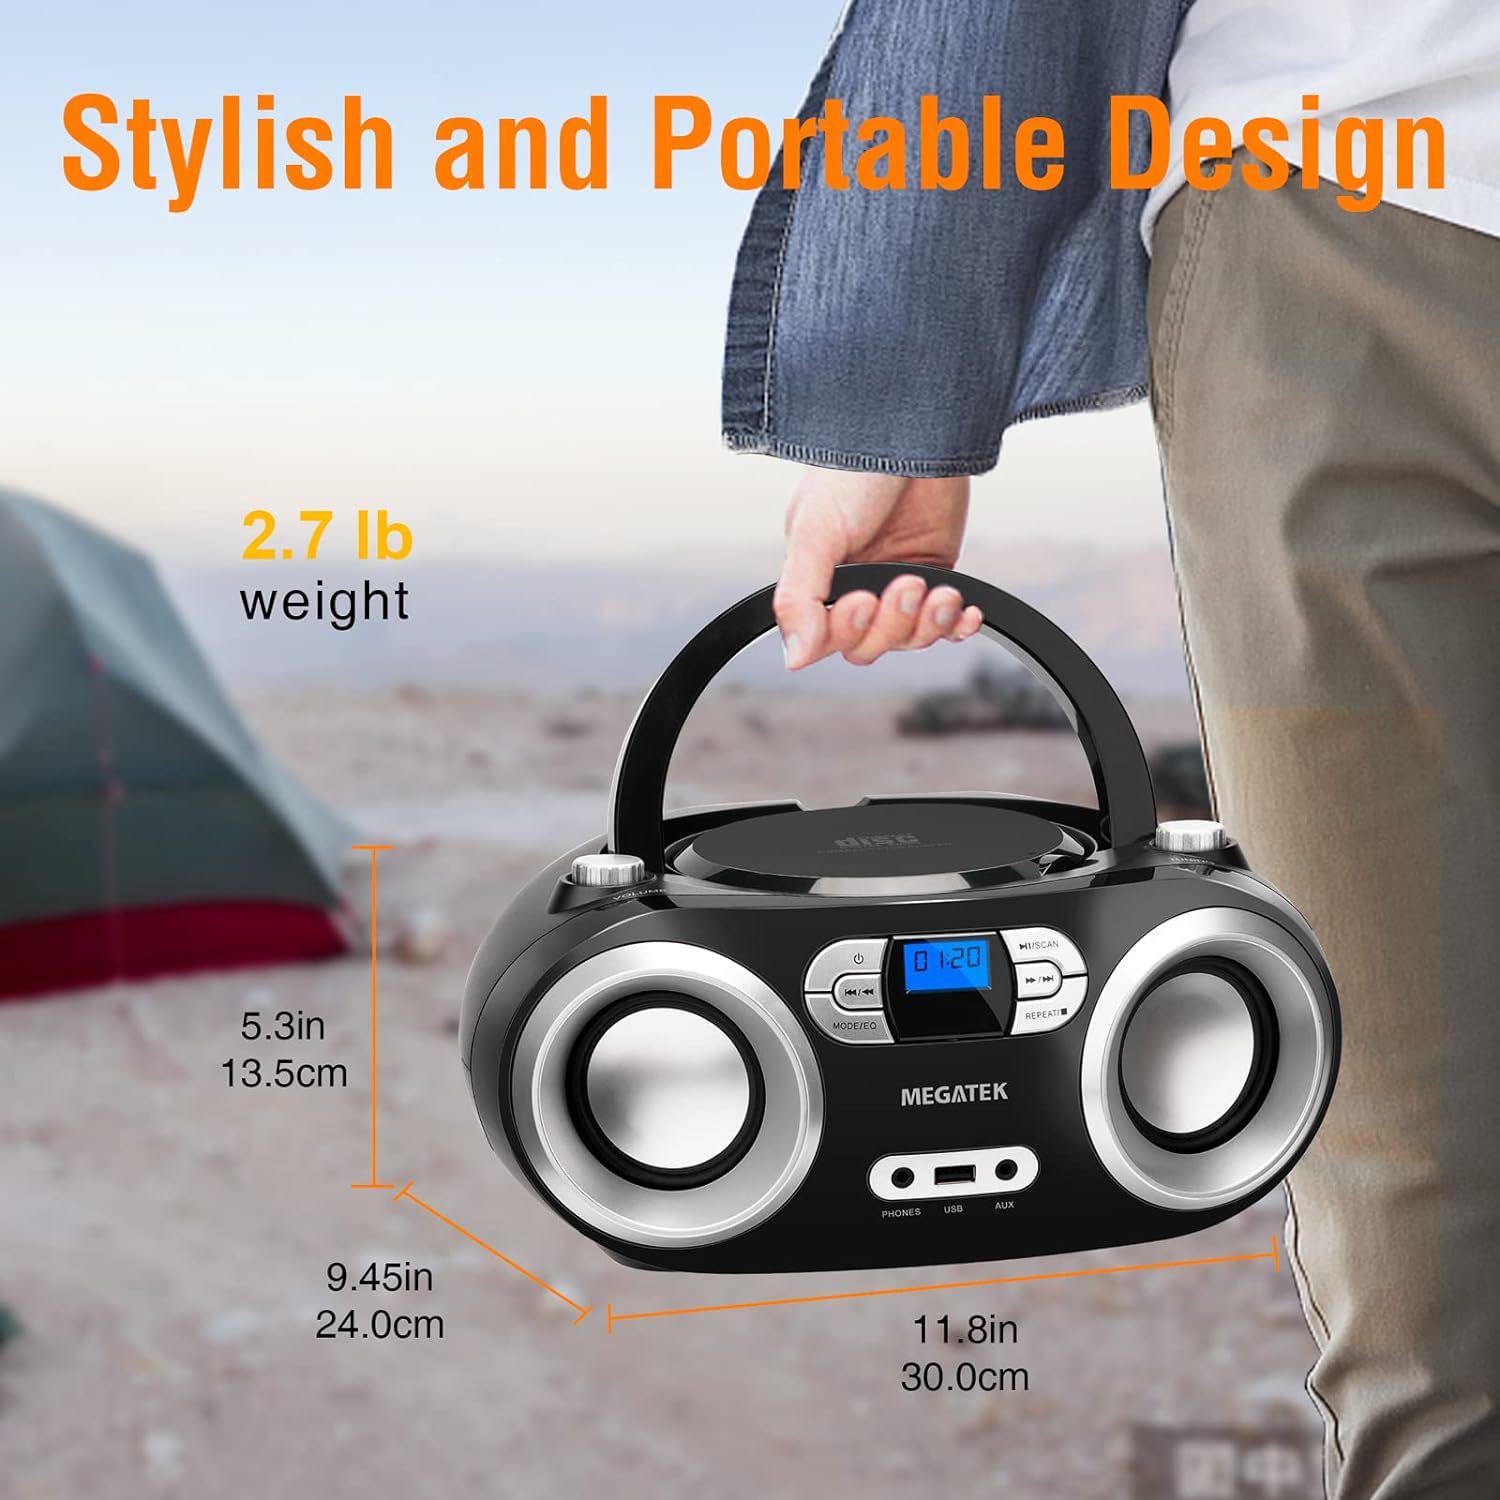 MEGATEK Portable CD Player Boombox with FM Radio, Bluetooth, and USB Port |  Clear Stereo Sound | CD-R/RW and MP3 CDs Compatible | 3.5mm Aux Input and